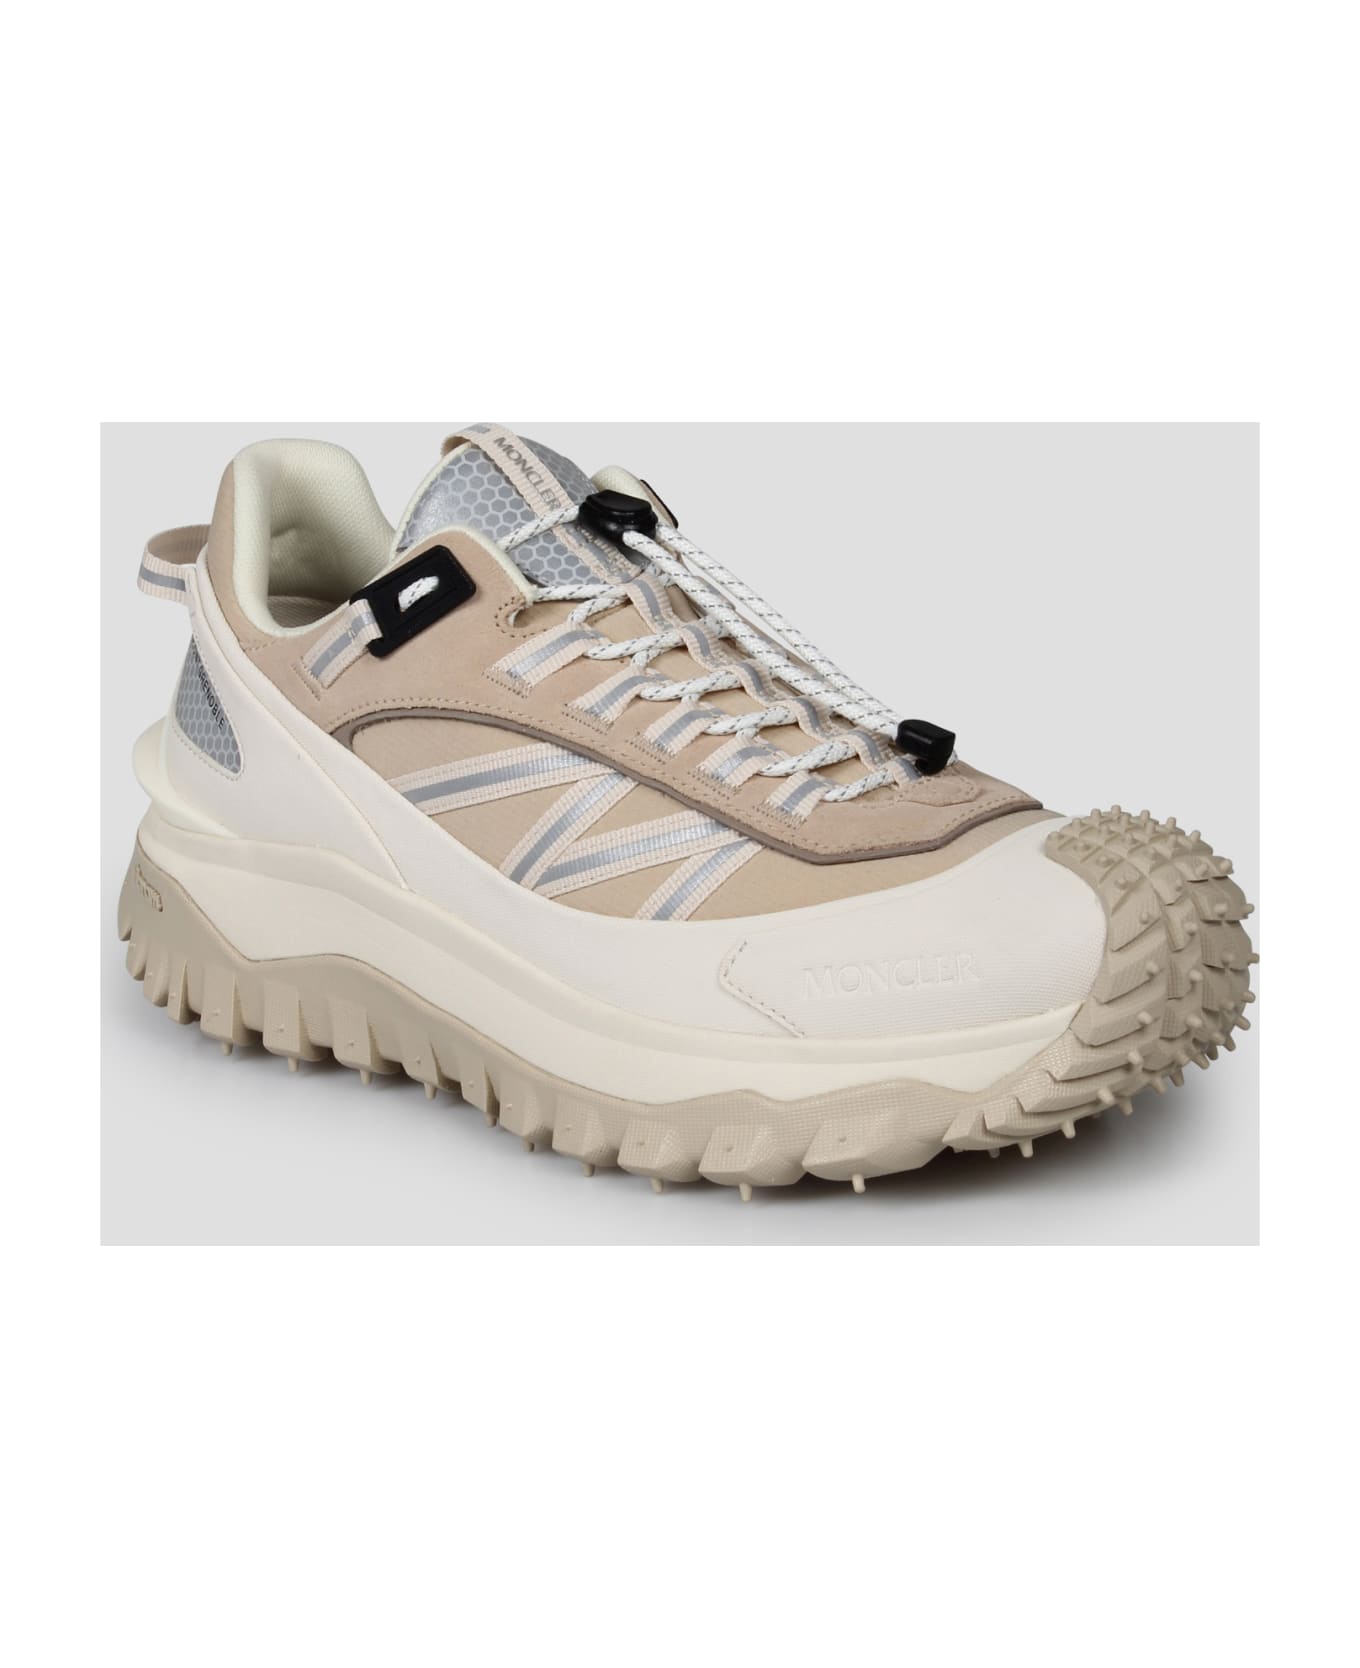 Moncler Trailgrip Sneakers - Nude & Neutrals スニーカー